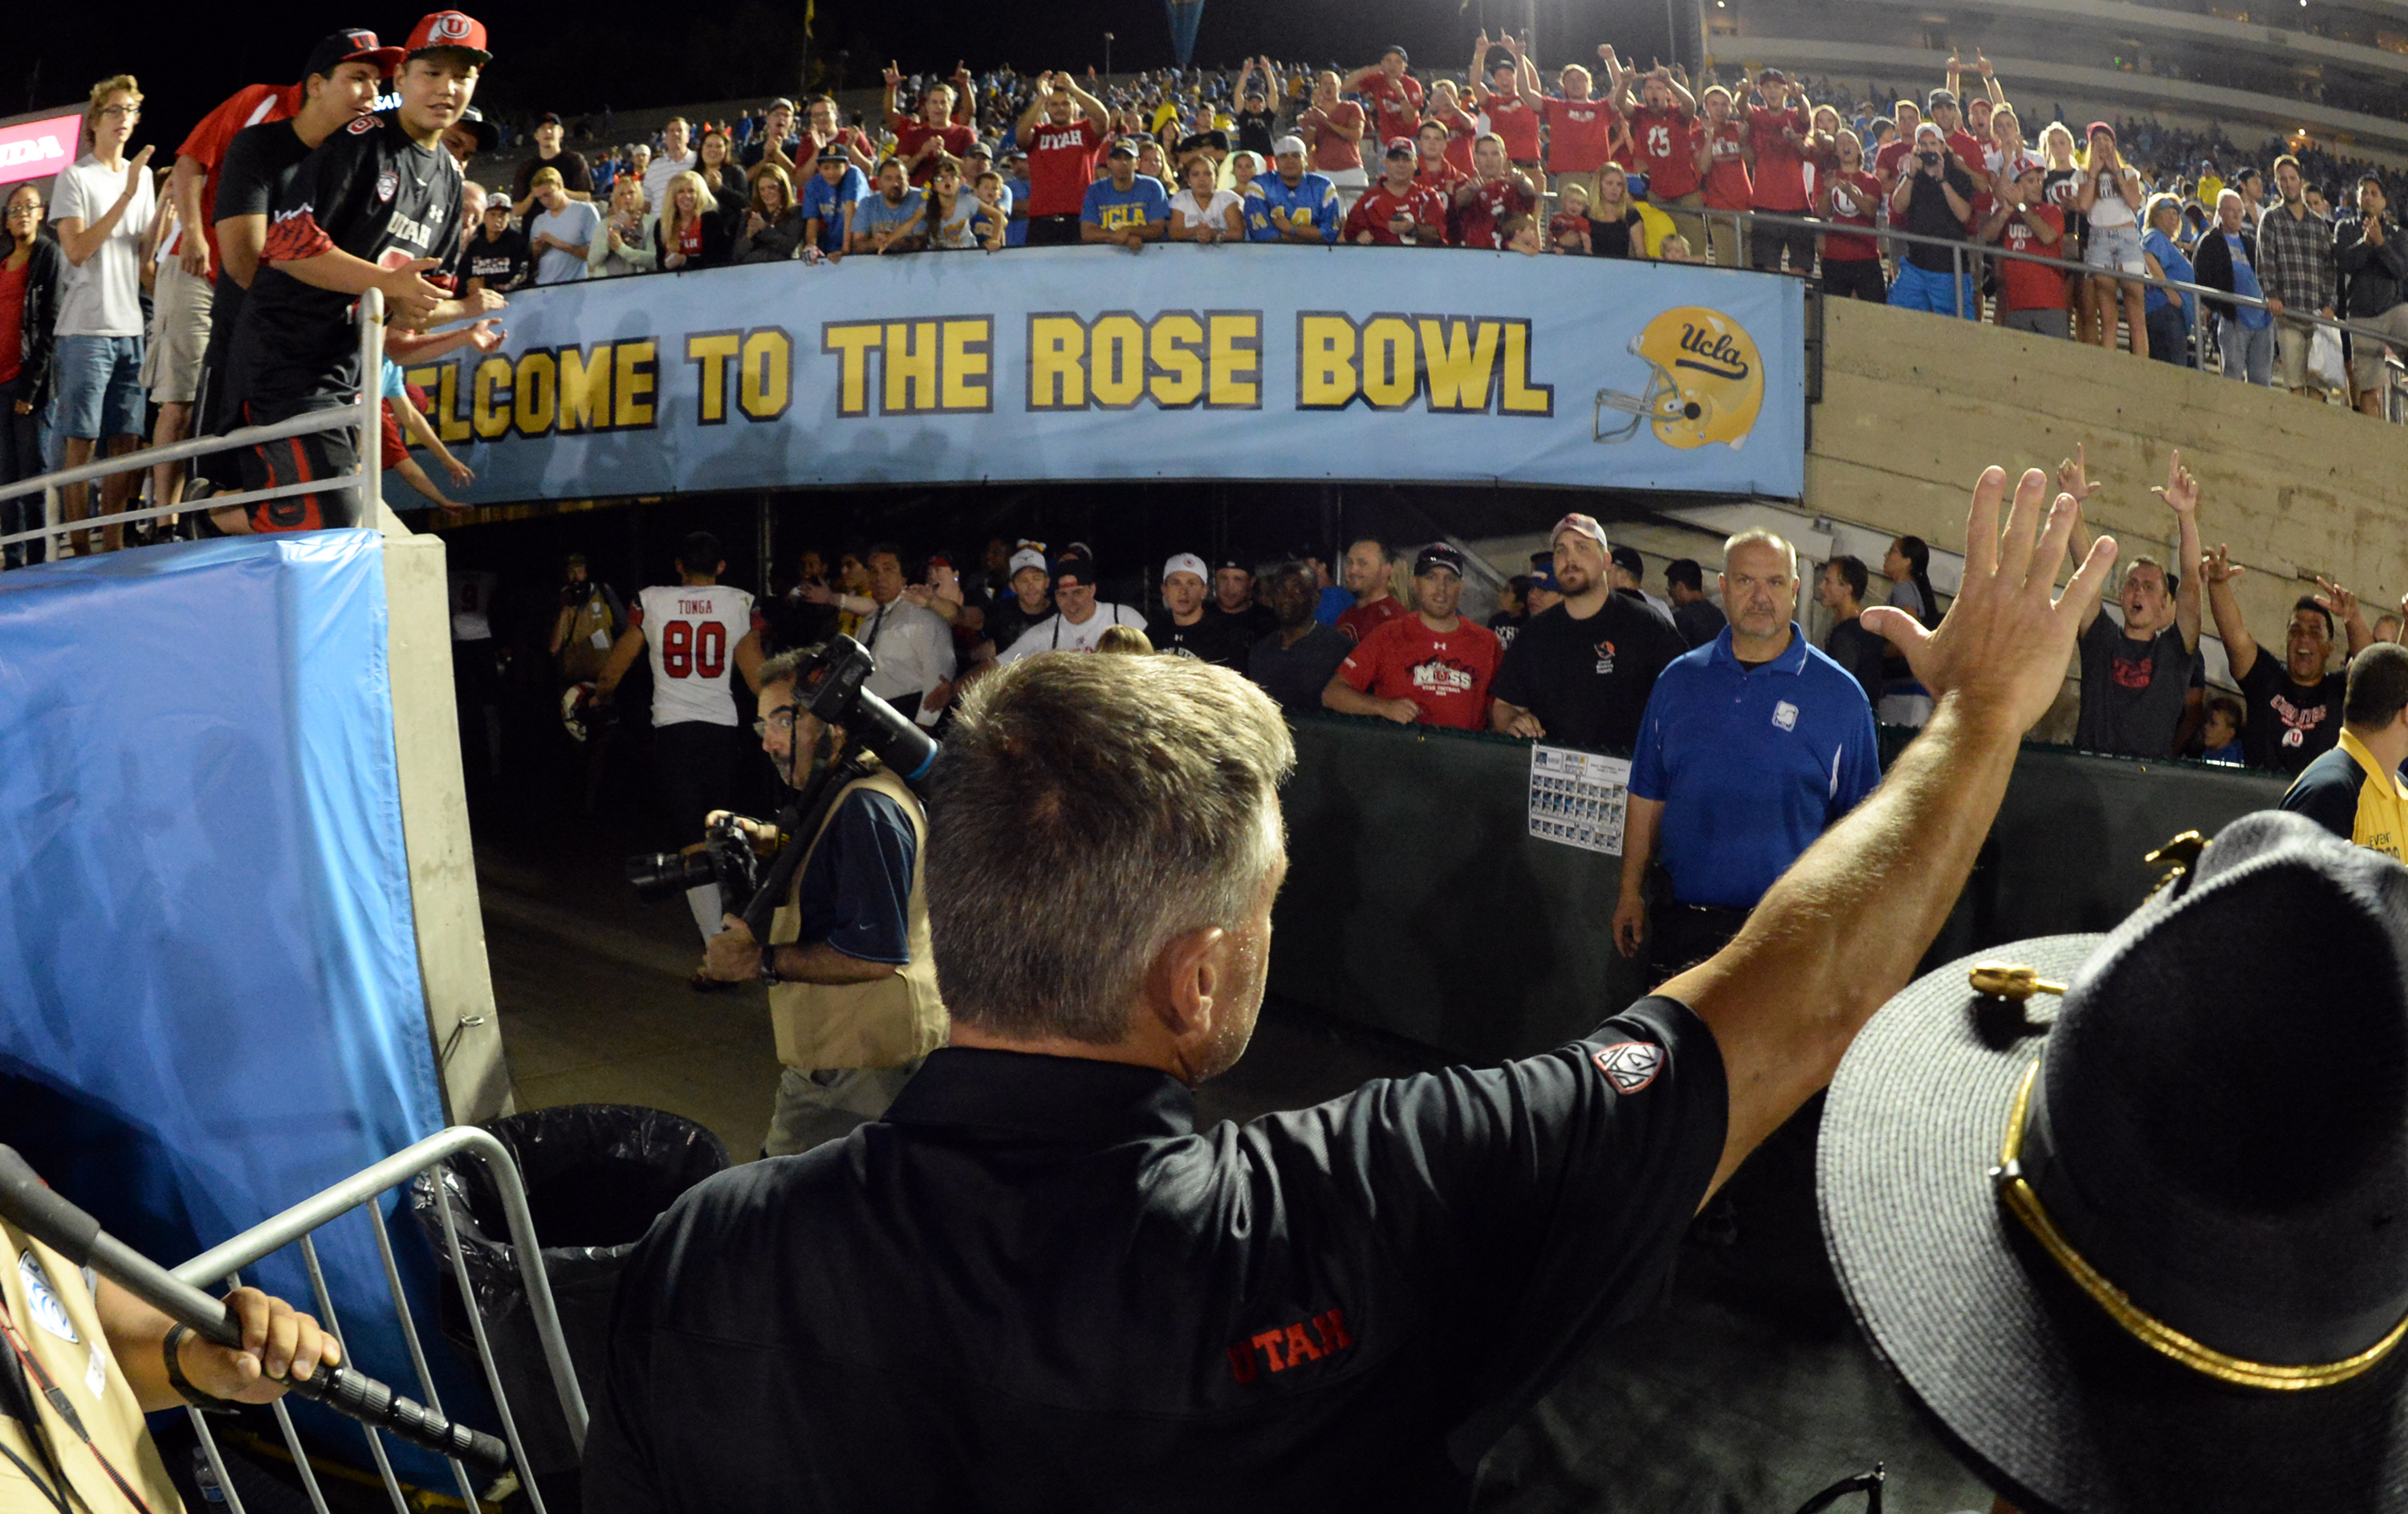 Utah coach Kyle Whittingham waves to fans after defeating UCLA, 30-28, at the Rose Bowl on Oct. 4, 2014. (Keith Birmingham/Staff)